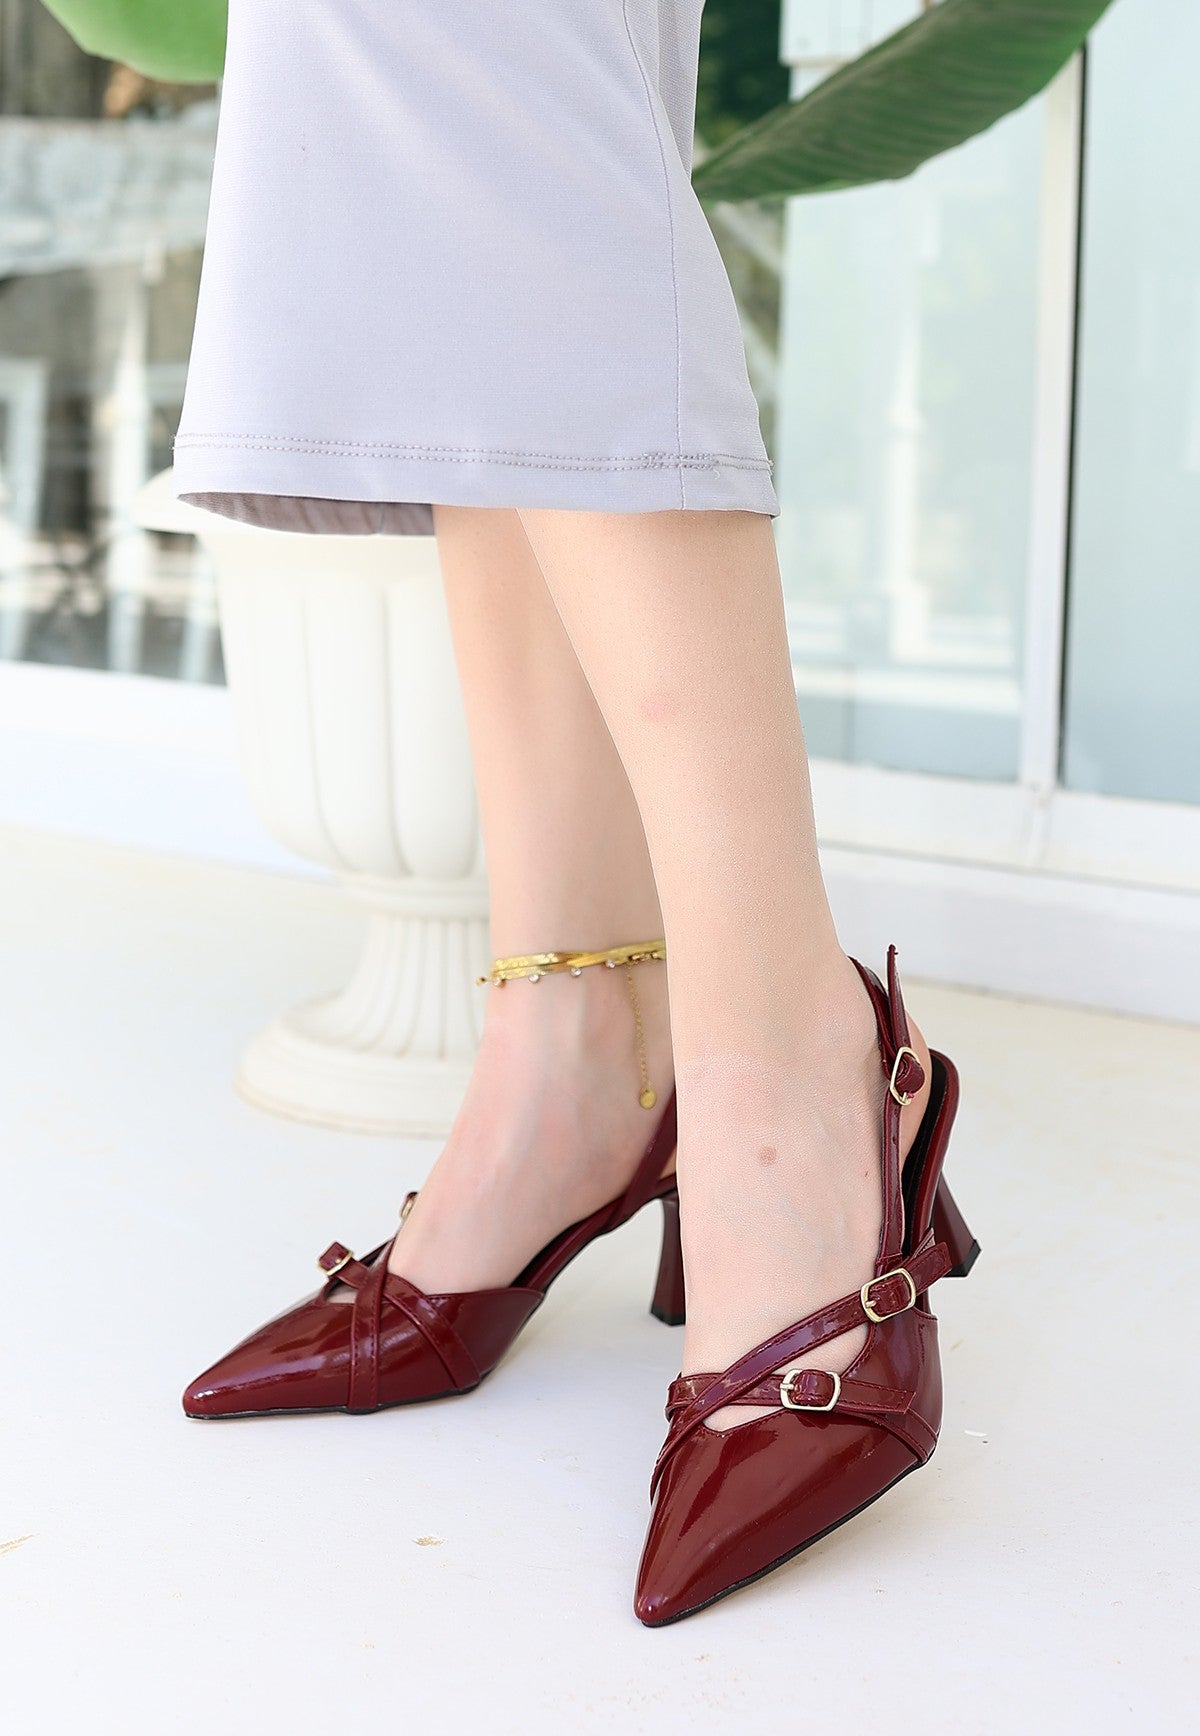 Women's Liwan Claret Red Patent Leather Heeled Shoes - STREETMODE™